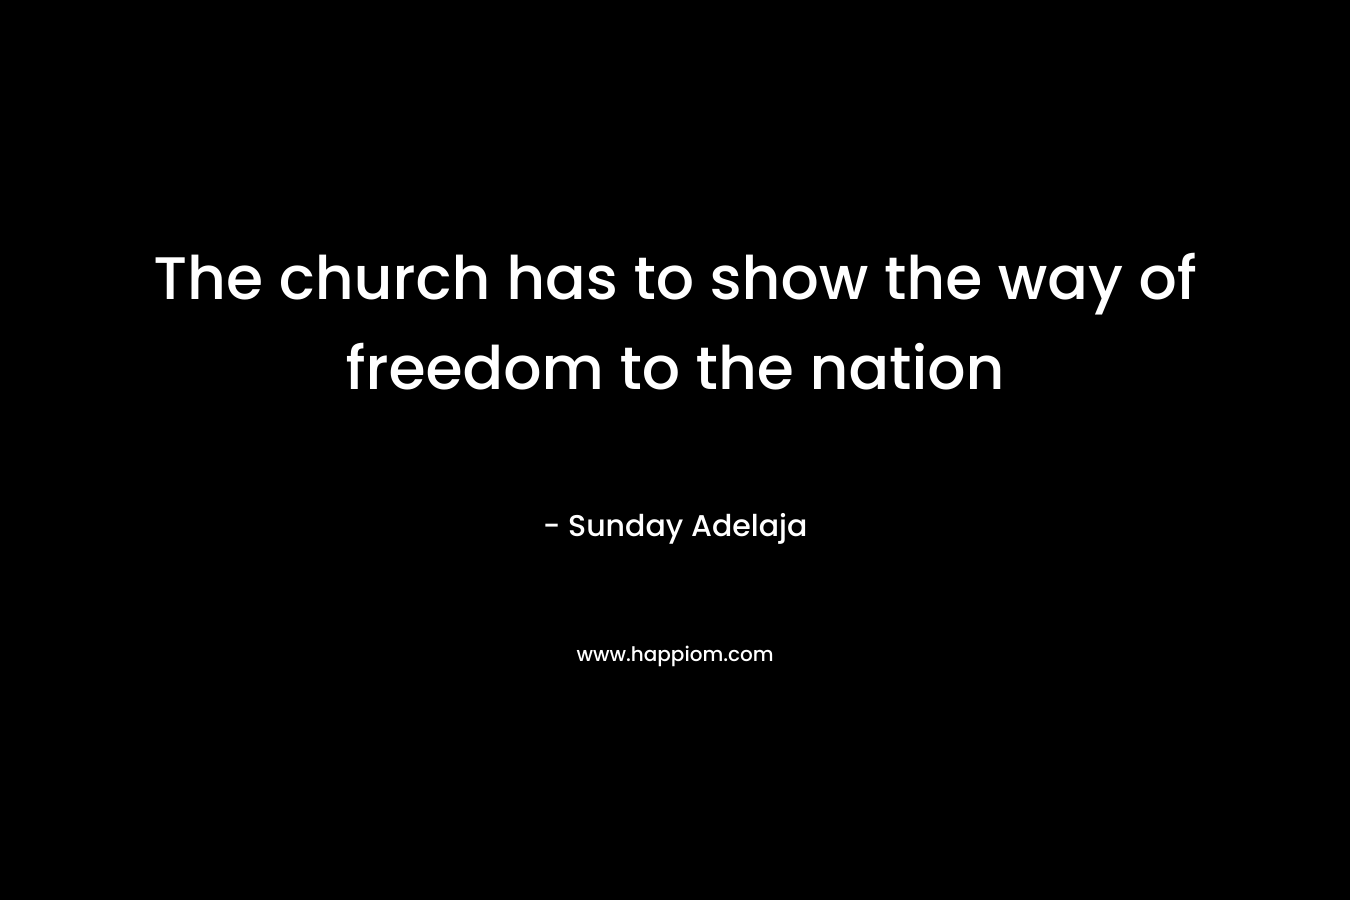 The church has to show the way of freedom to the nation